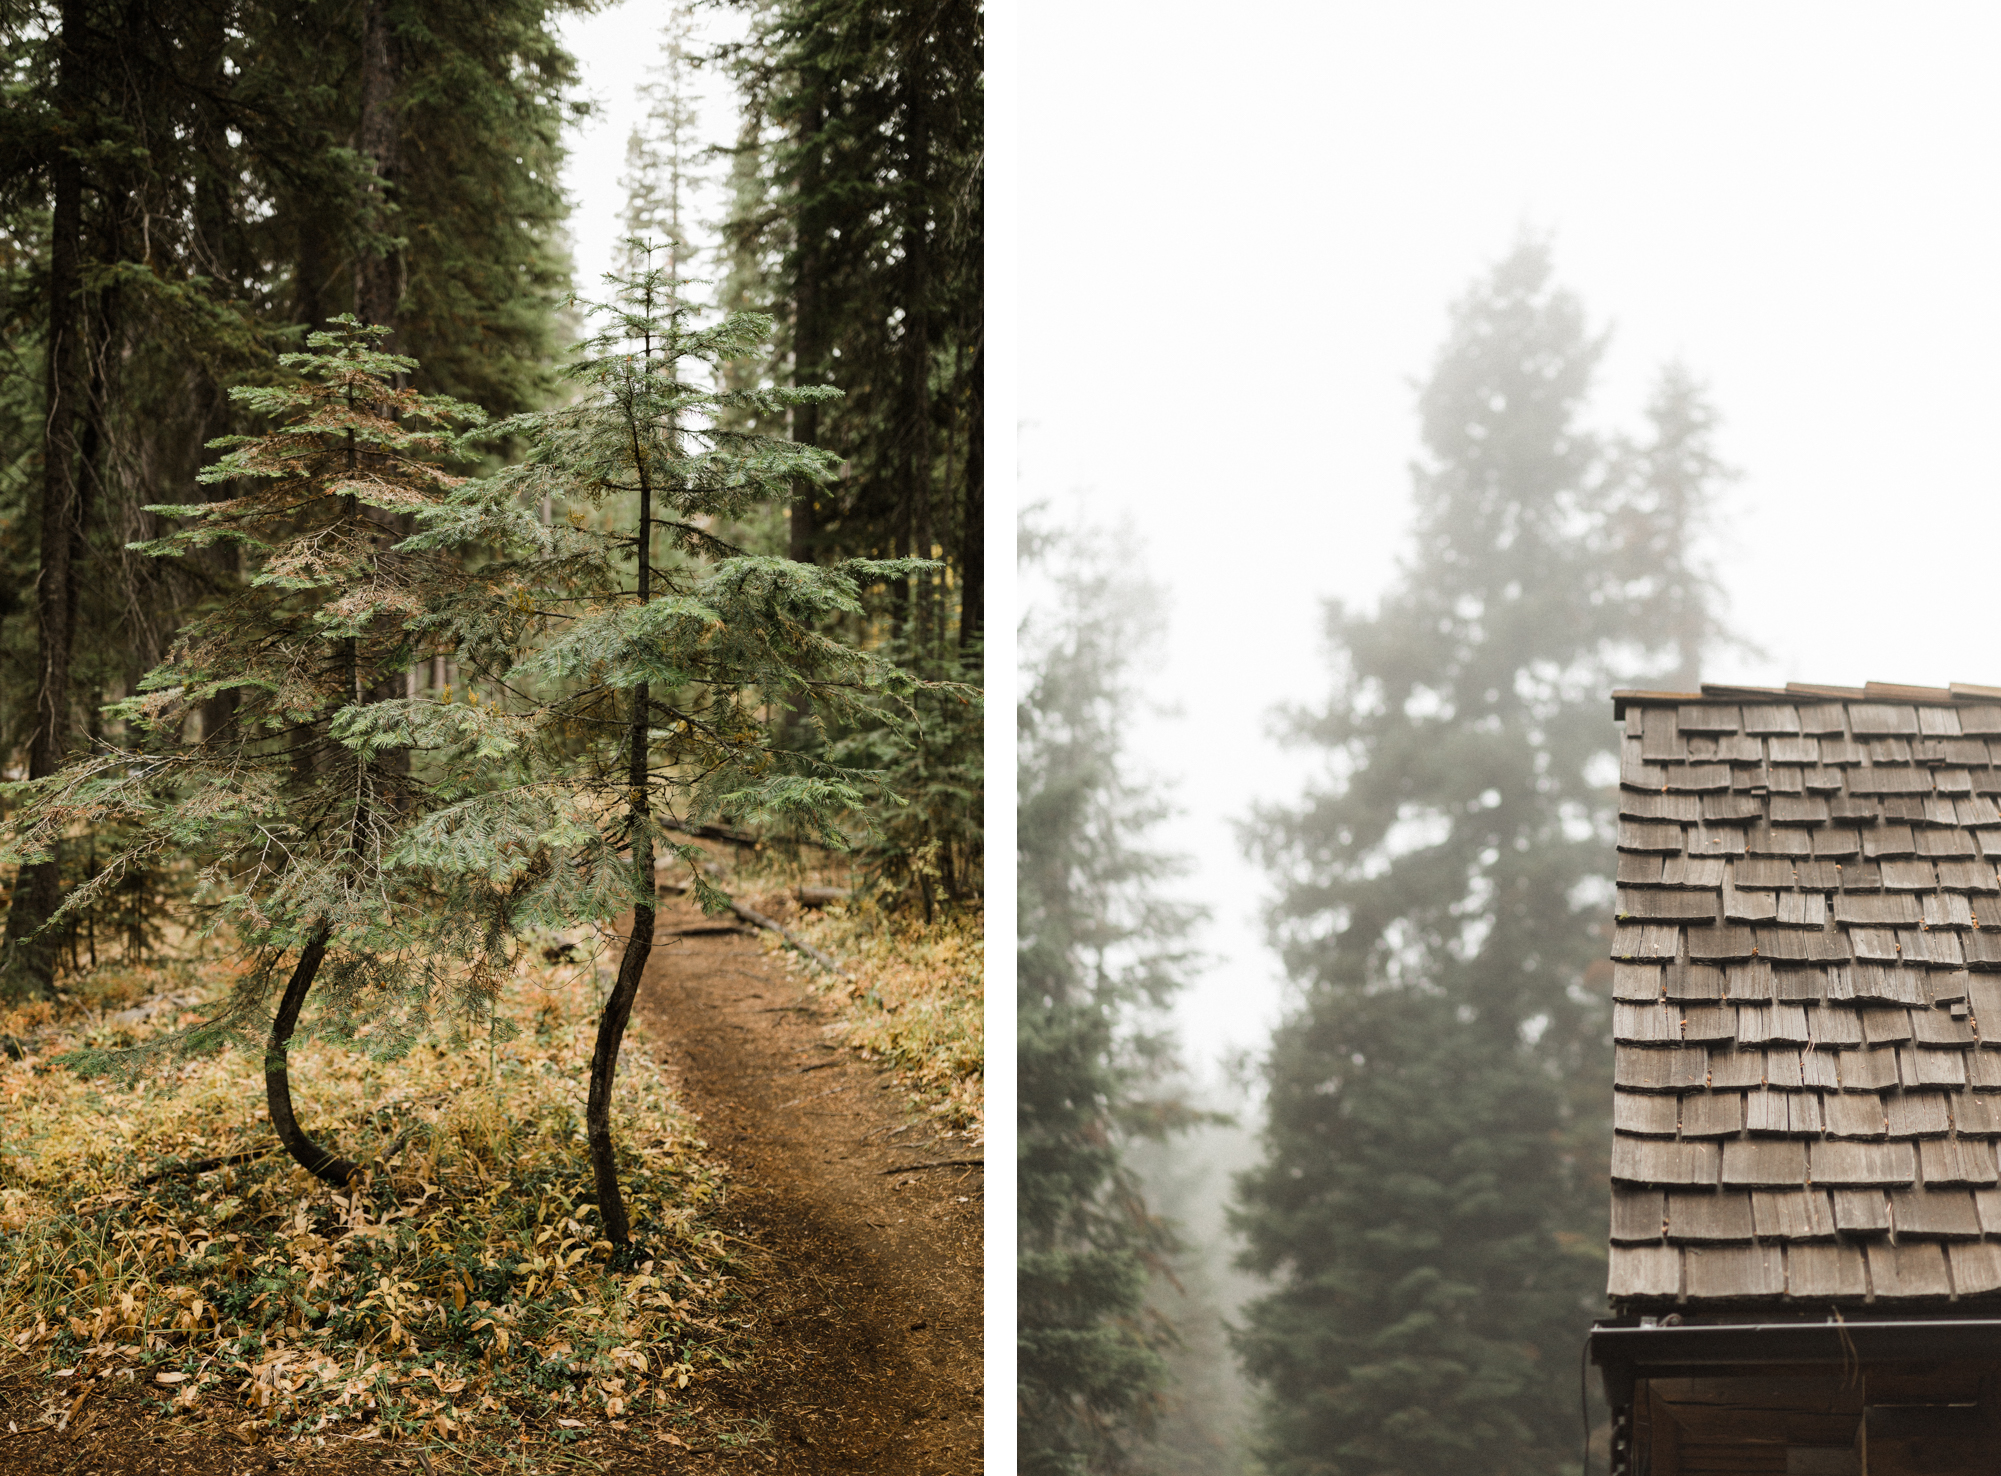 Tree, mist, and cabin rooftop at Skyliner Lodge in Bend, Oregon